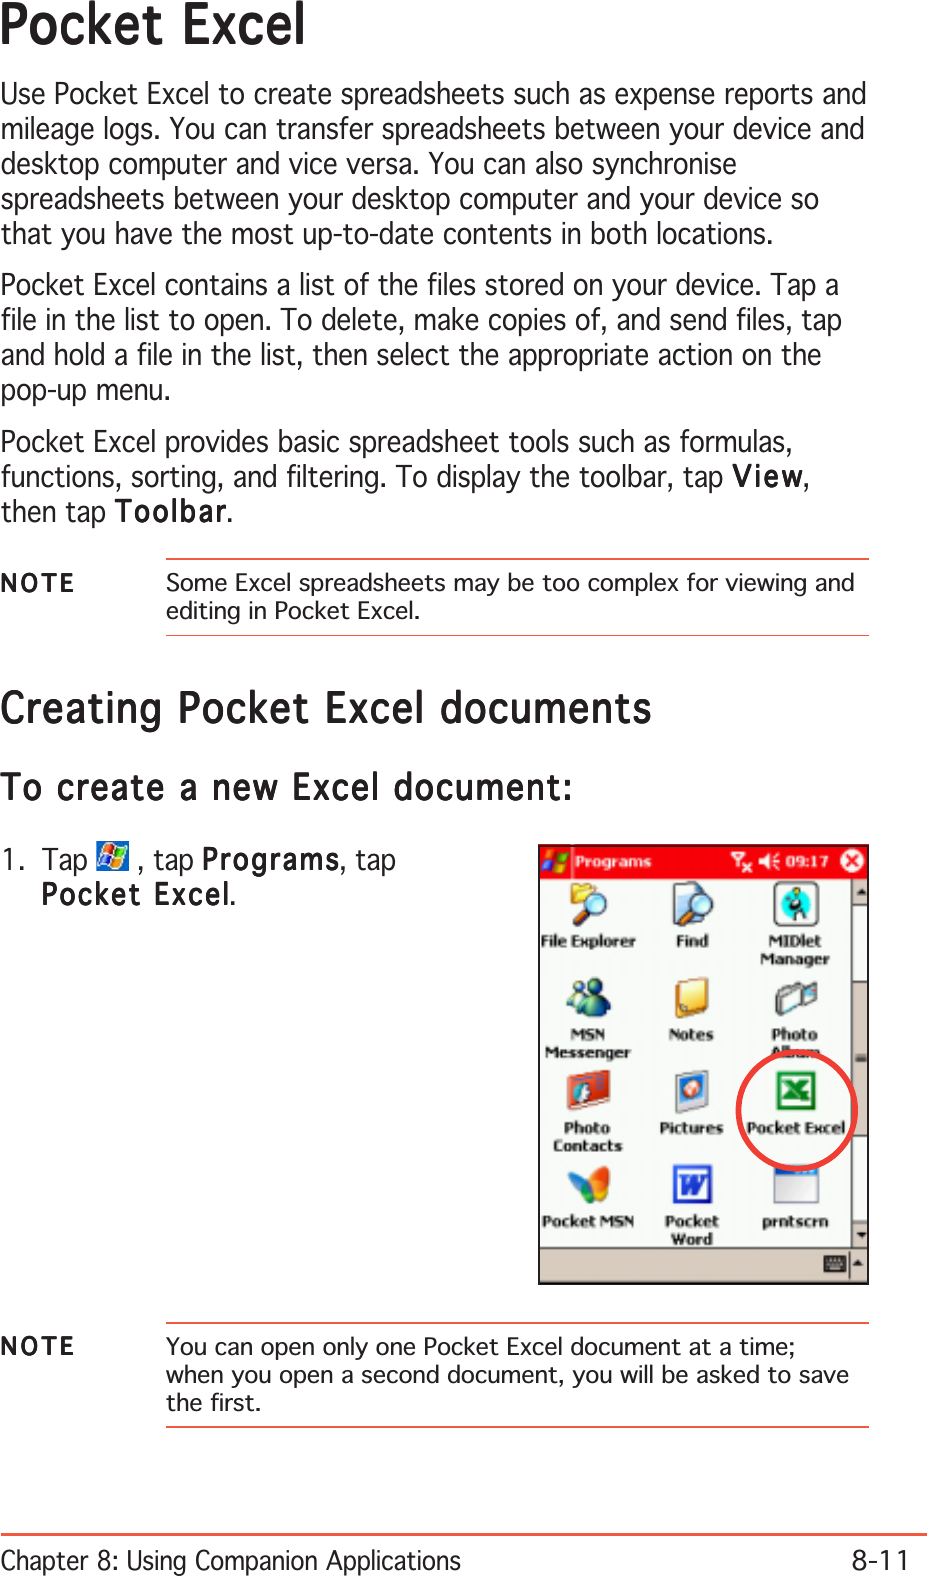 Chapter 8: Using Companion Applications8-11Pocket ExcelPocket ExcelPocket ExcelPocket ExcelPocket ExcelUse Pocket Excel to create spreadsheets such as expense reports andmileage logs. You can transfer spreadsheets between your device anddesktop computer and vice versa. You can also synchronisespreadsheets between your desktop computer and your device sothat you have the most up-to-date contents in both locations.Pocket Excel contains a list of the files stored on your device. Tap afile in the list to open. To delete, make copies of, and send files, tapand hold a file in the list, then select the appropriate action on thepop-up menu.Pocket Excel provides basic spreadsheet tools such as formulas,functions, sorting, and filtering. To display the toolbar, tap ViewViewViewViewView,then tap ToolbarToolbarToolbarToolbarToolbar.NOTENOTENOTENOTEN O T E Some Excel spreadsheets may be too complex for viewing andediting in Pocket Excel.NOTENOTENOTENOTEN O T E You can open only one Pocket Excel document at a time;when you open a second document, you will be asked to savethe first.Creating Pocket Excel documentsCreating Pocket Excel documentsCreating Pocket Excel documentsCreating Pocket Excel documentsCreating Pocket Excel documentsTo create a new Excel document:To create a new Excel document:To create a new Excel document:To create a new Excel document:To create a new Excel document:1. Tap   , tap ProgramsProgramsProgramsProgramsPrograms, tapPocket ExcelPocket ExcelPocket ExcelPocket ExcelPocket Excel.